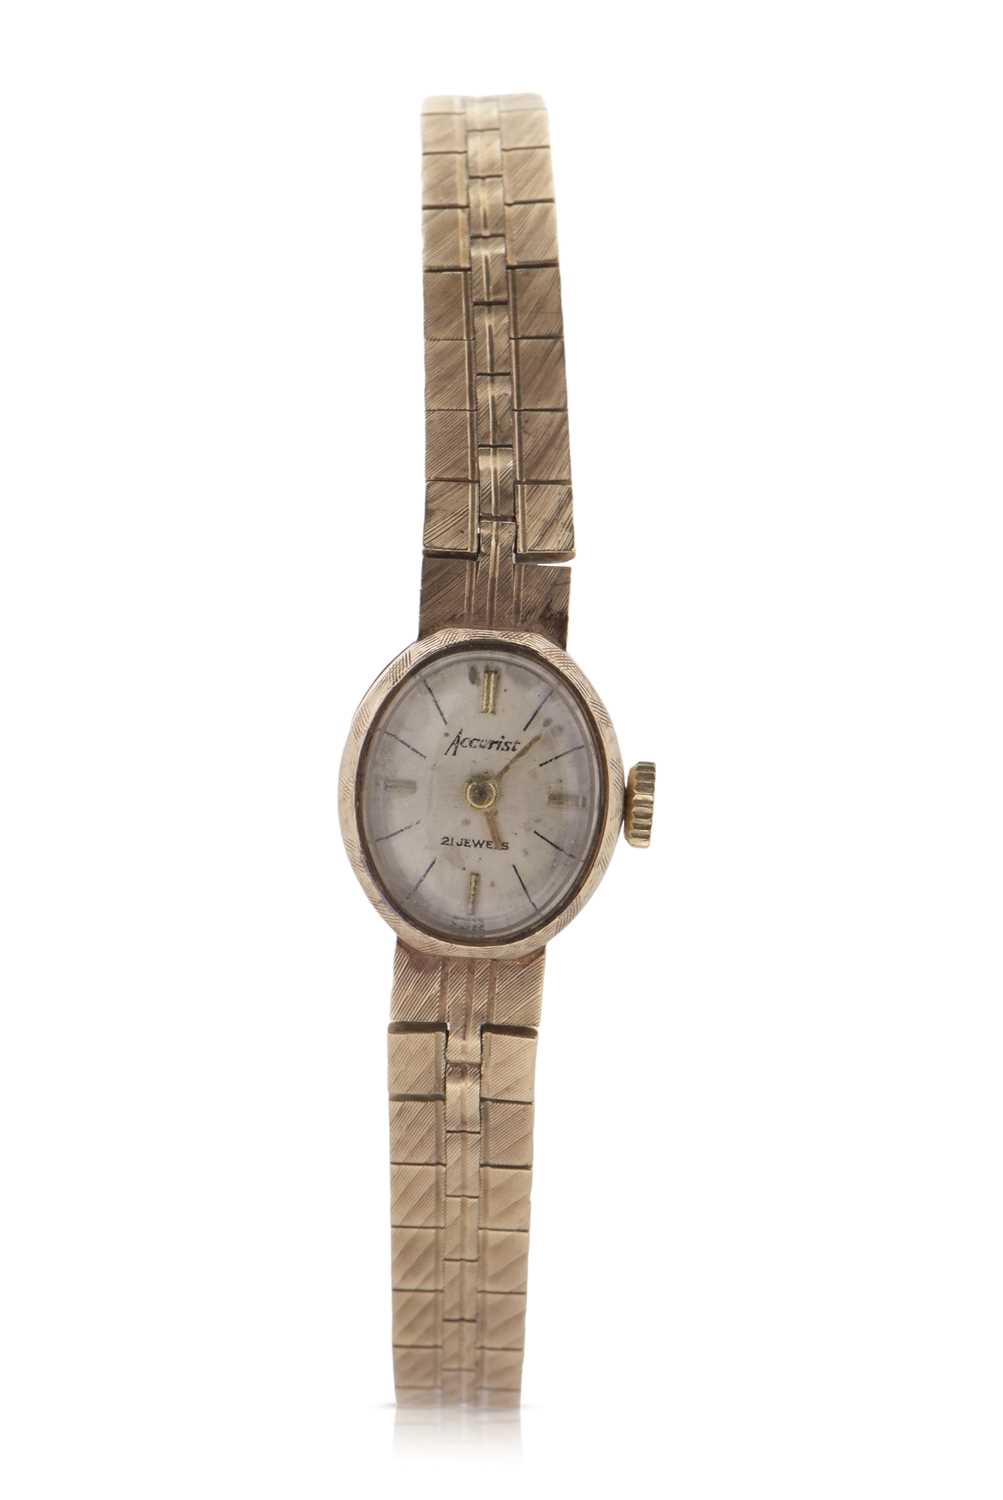 A 9ct gold ladies Accurist wristwatch, the watch has a 21 jewel manually crown wound movement, 375